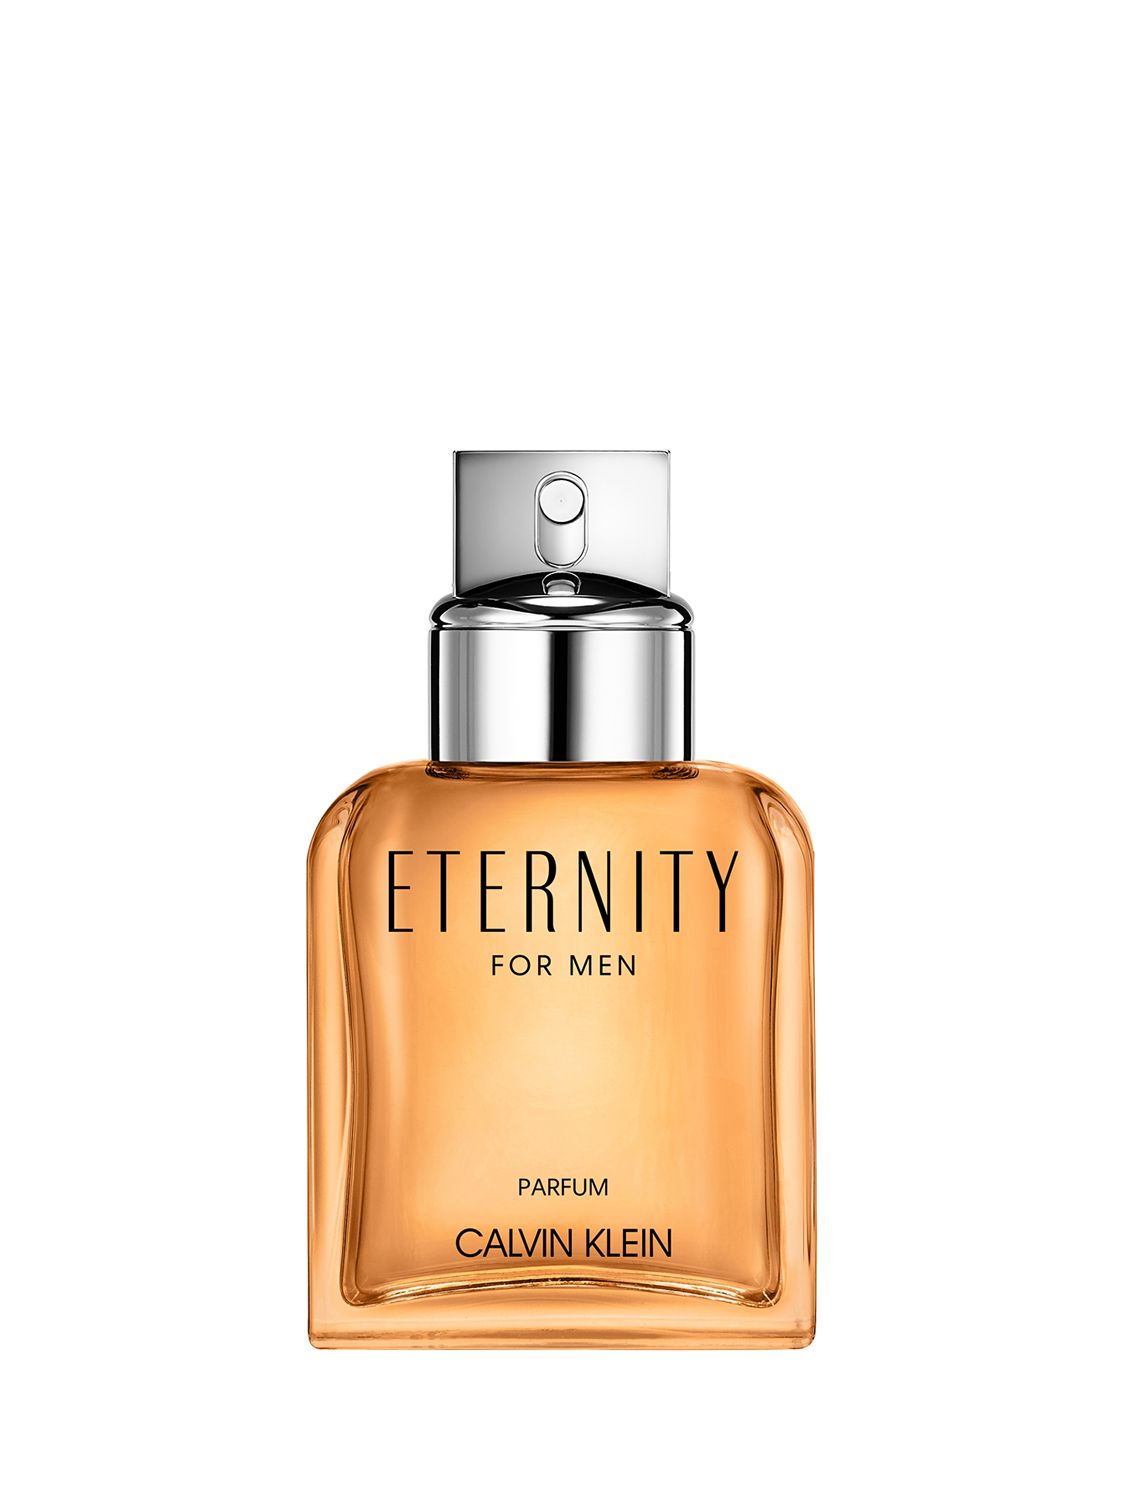 Eternity Moment by Calvin Klein - The Perfume Club